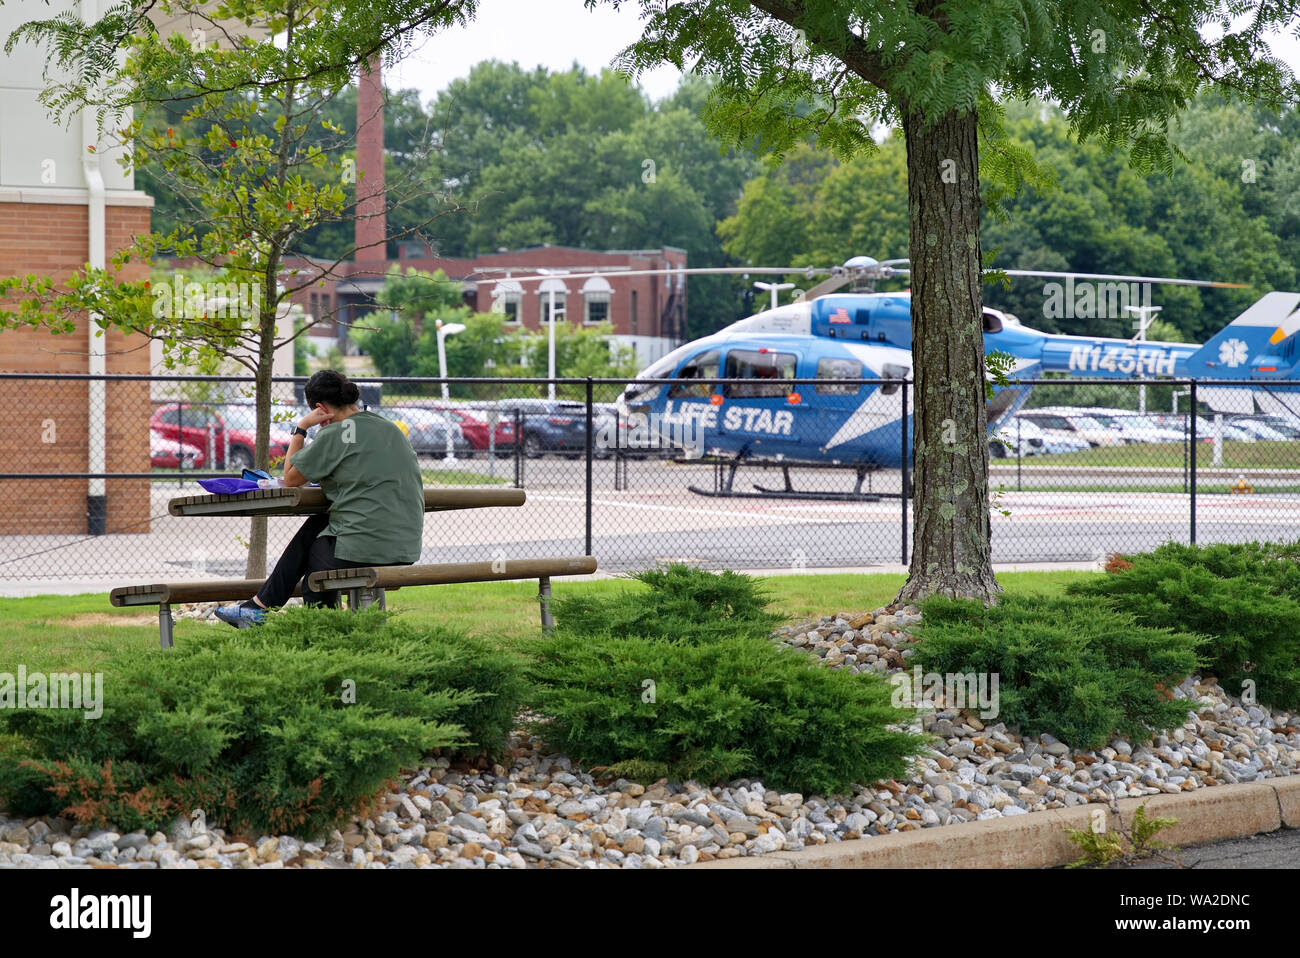 Meriden, CT USA. Aug 2019. Hospital personnel having lunch under a tree nearby the Life Star medical transport helicopter. Stock Photo